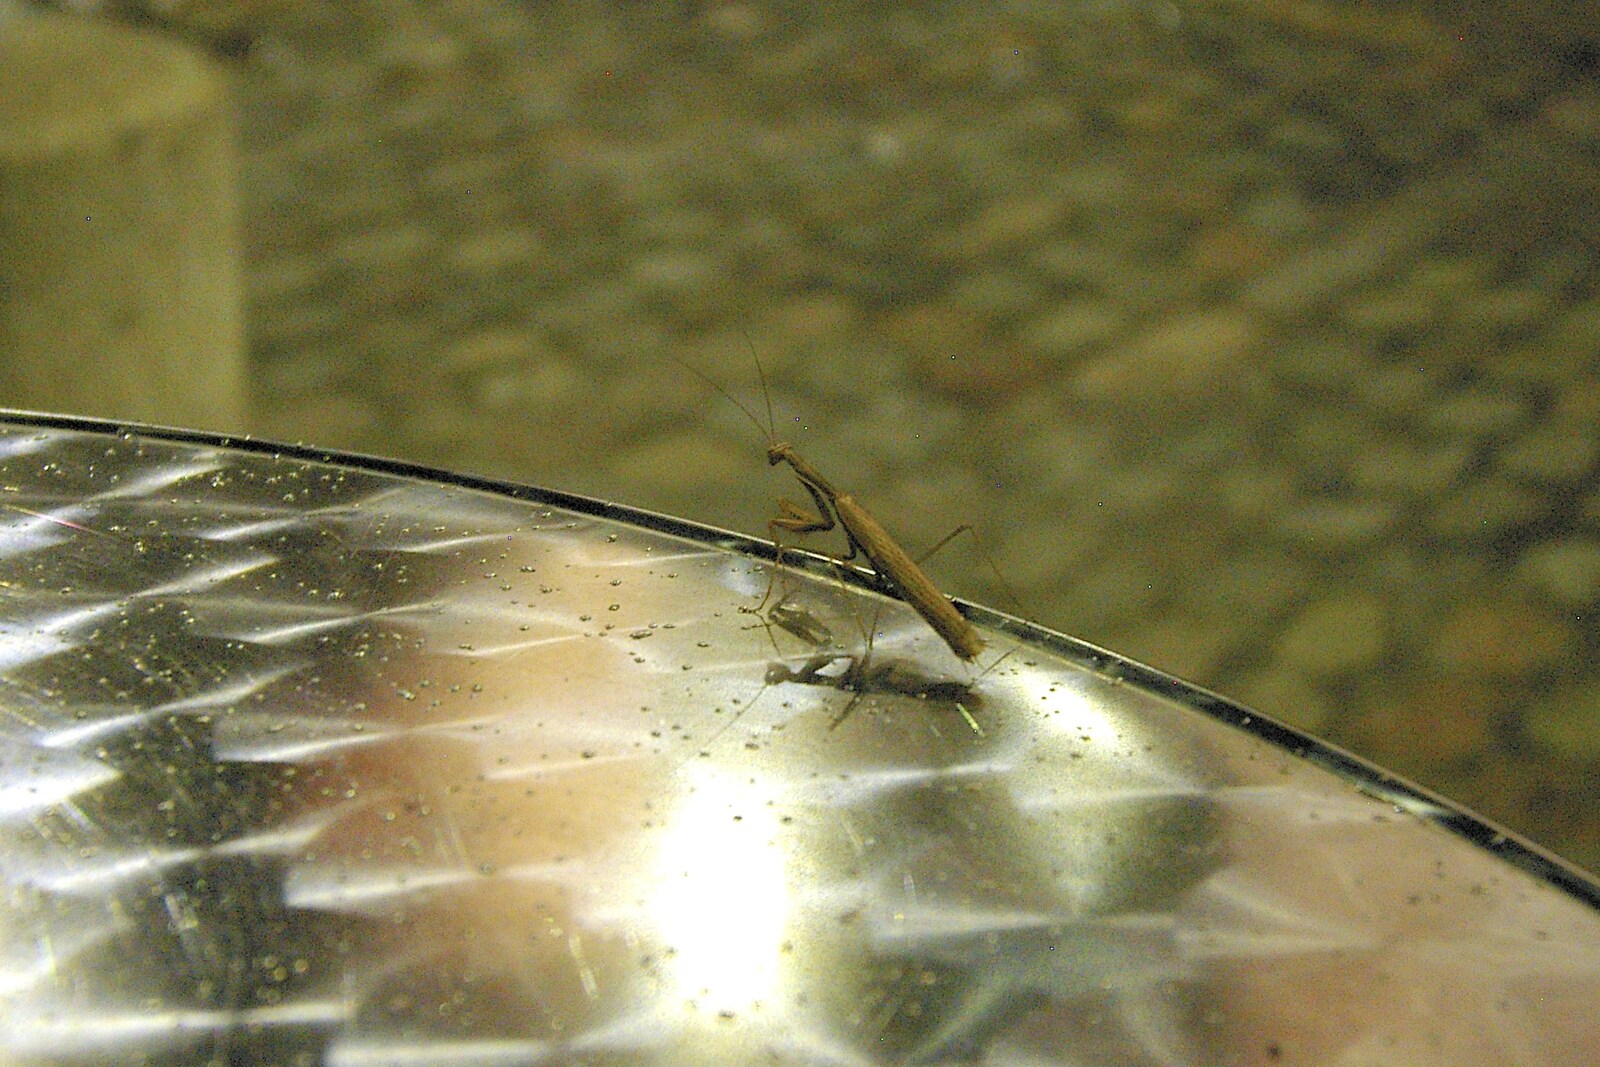 The praying mantiss on the café table from Two Days in Barcelona, Catalunya, Spain - 22nd September 2006